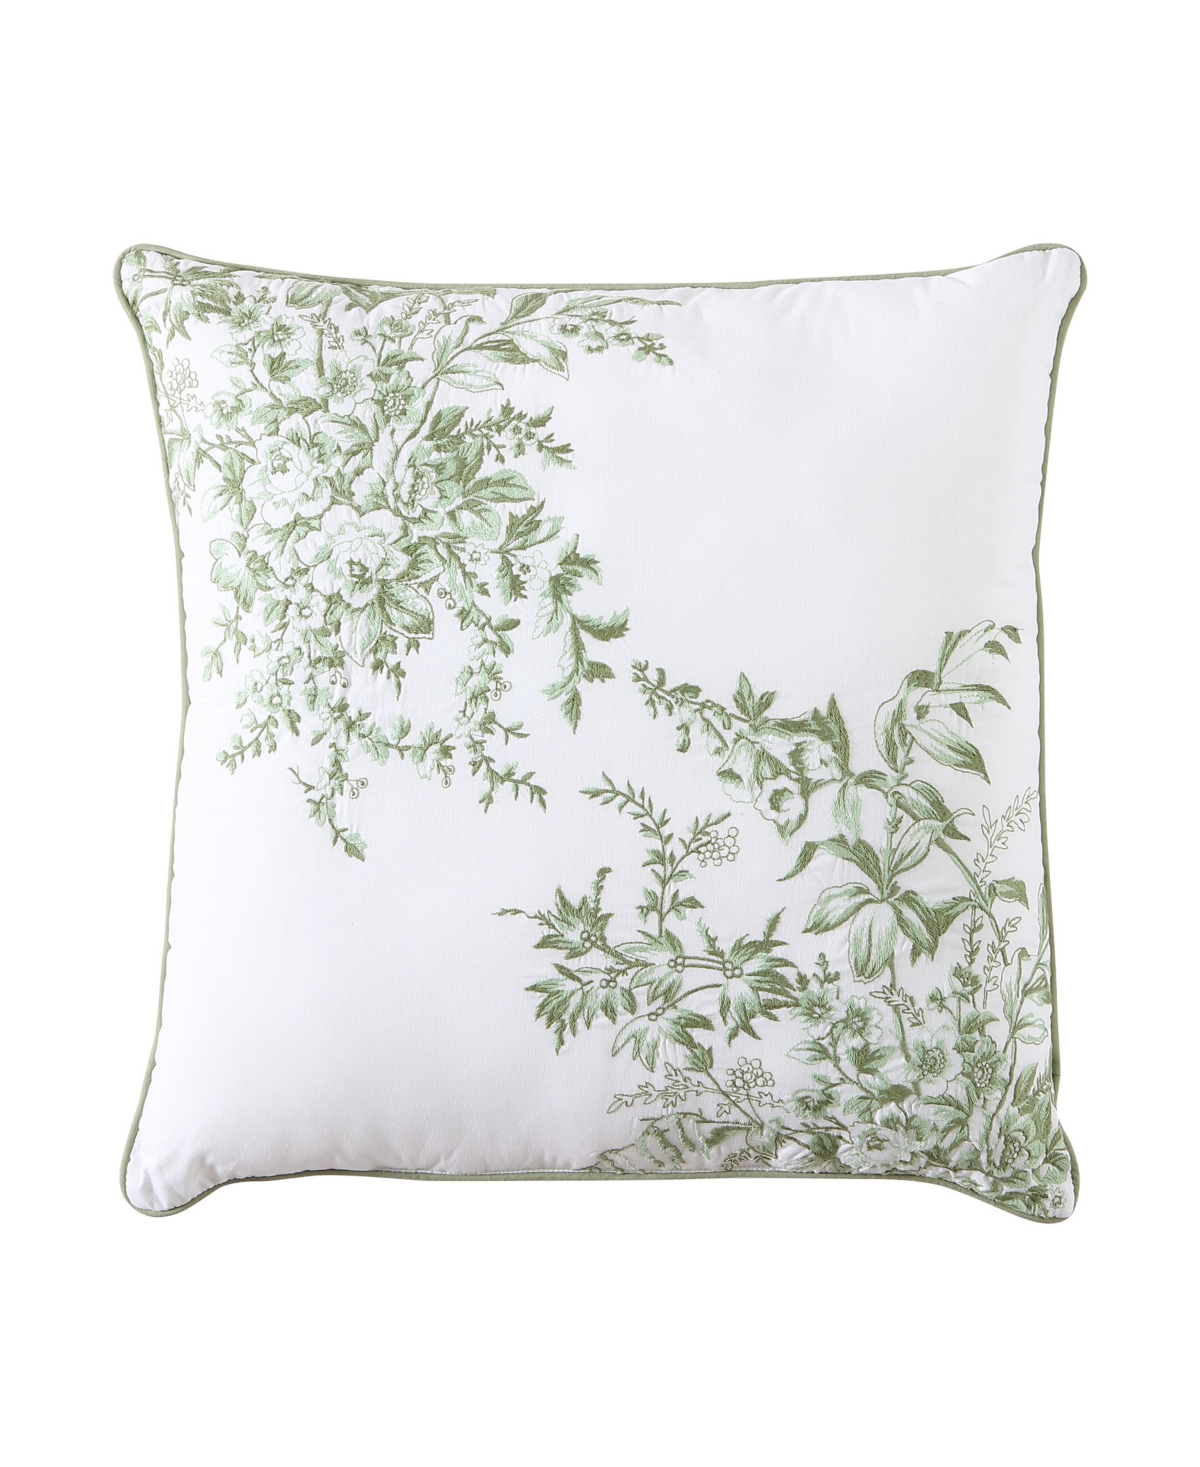 Laura Ashley Bedford Embroidered Decorative Pillow, 20" X 20" In Sage